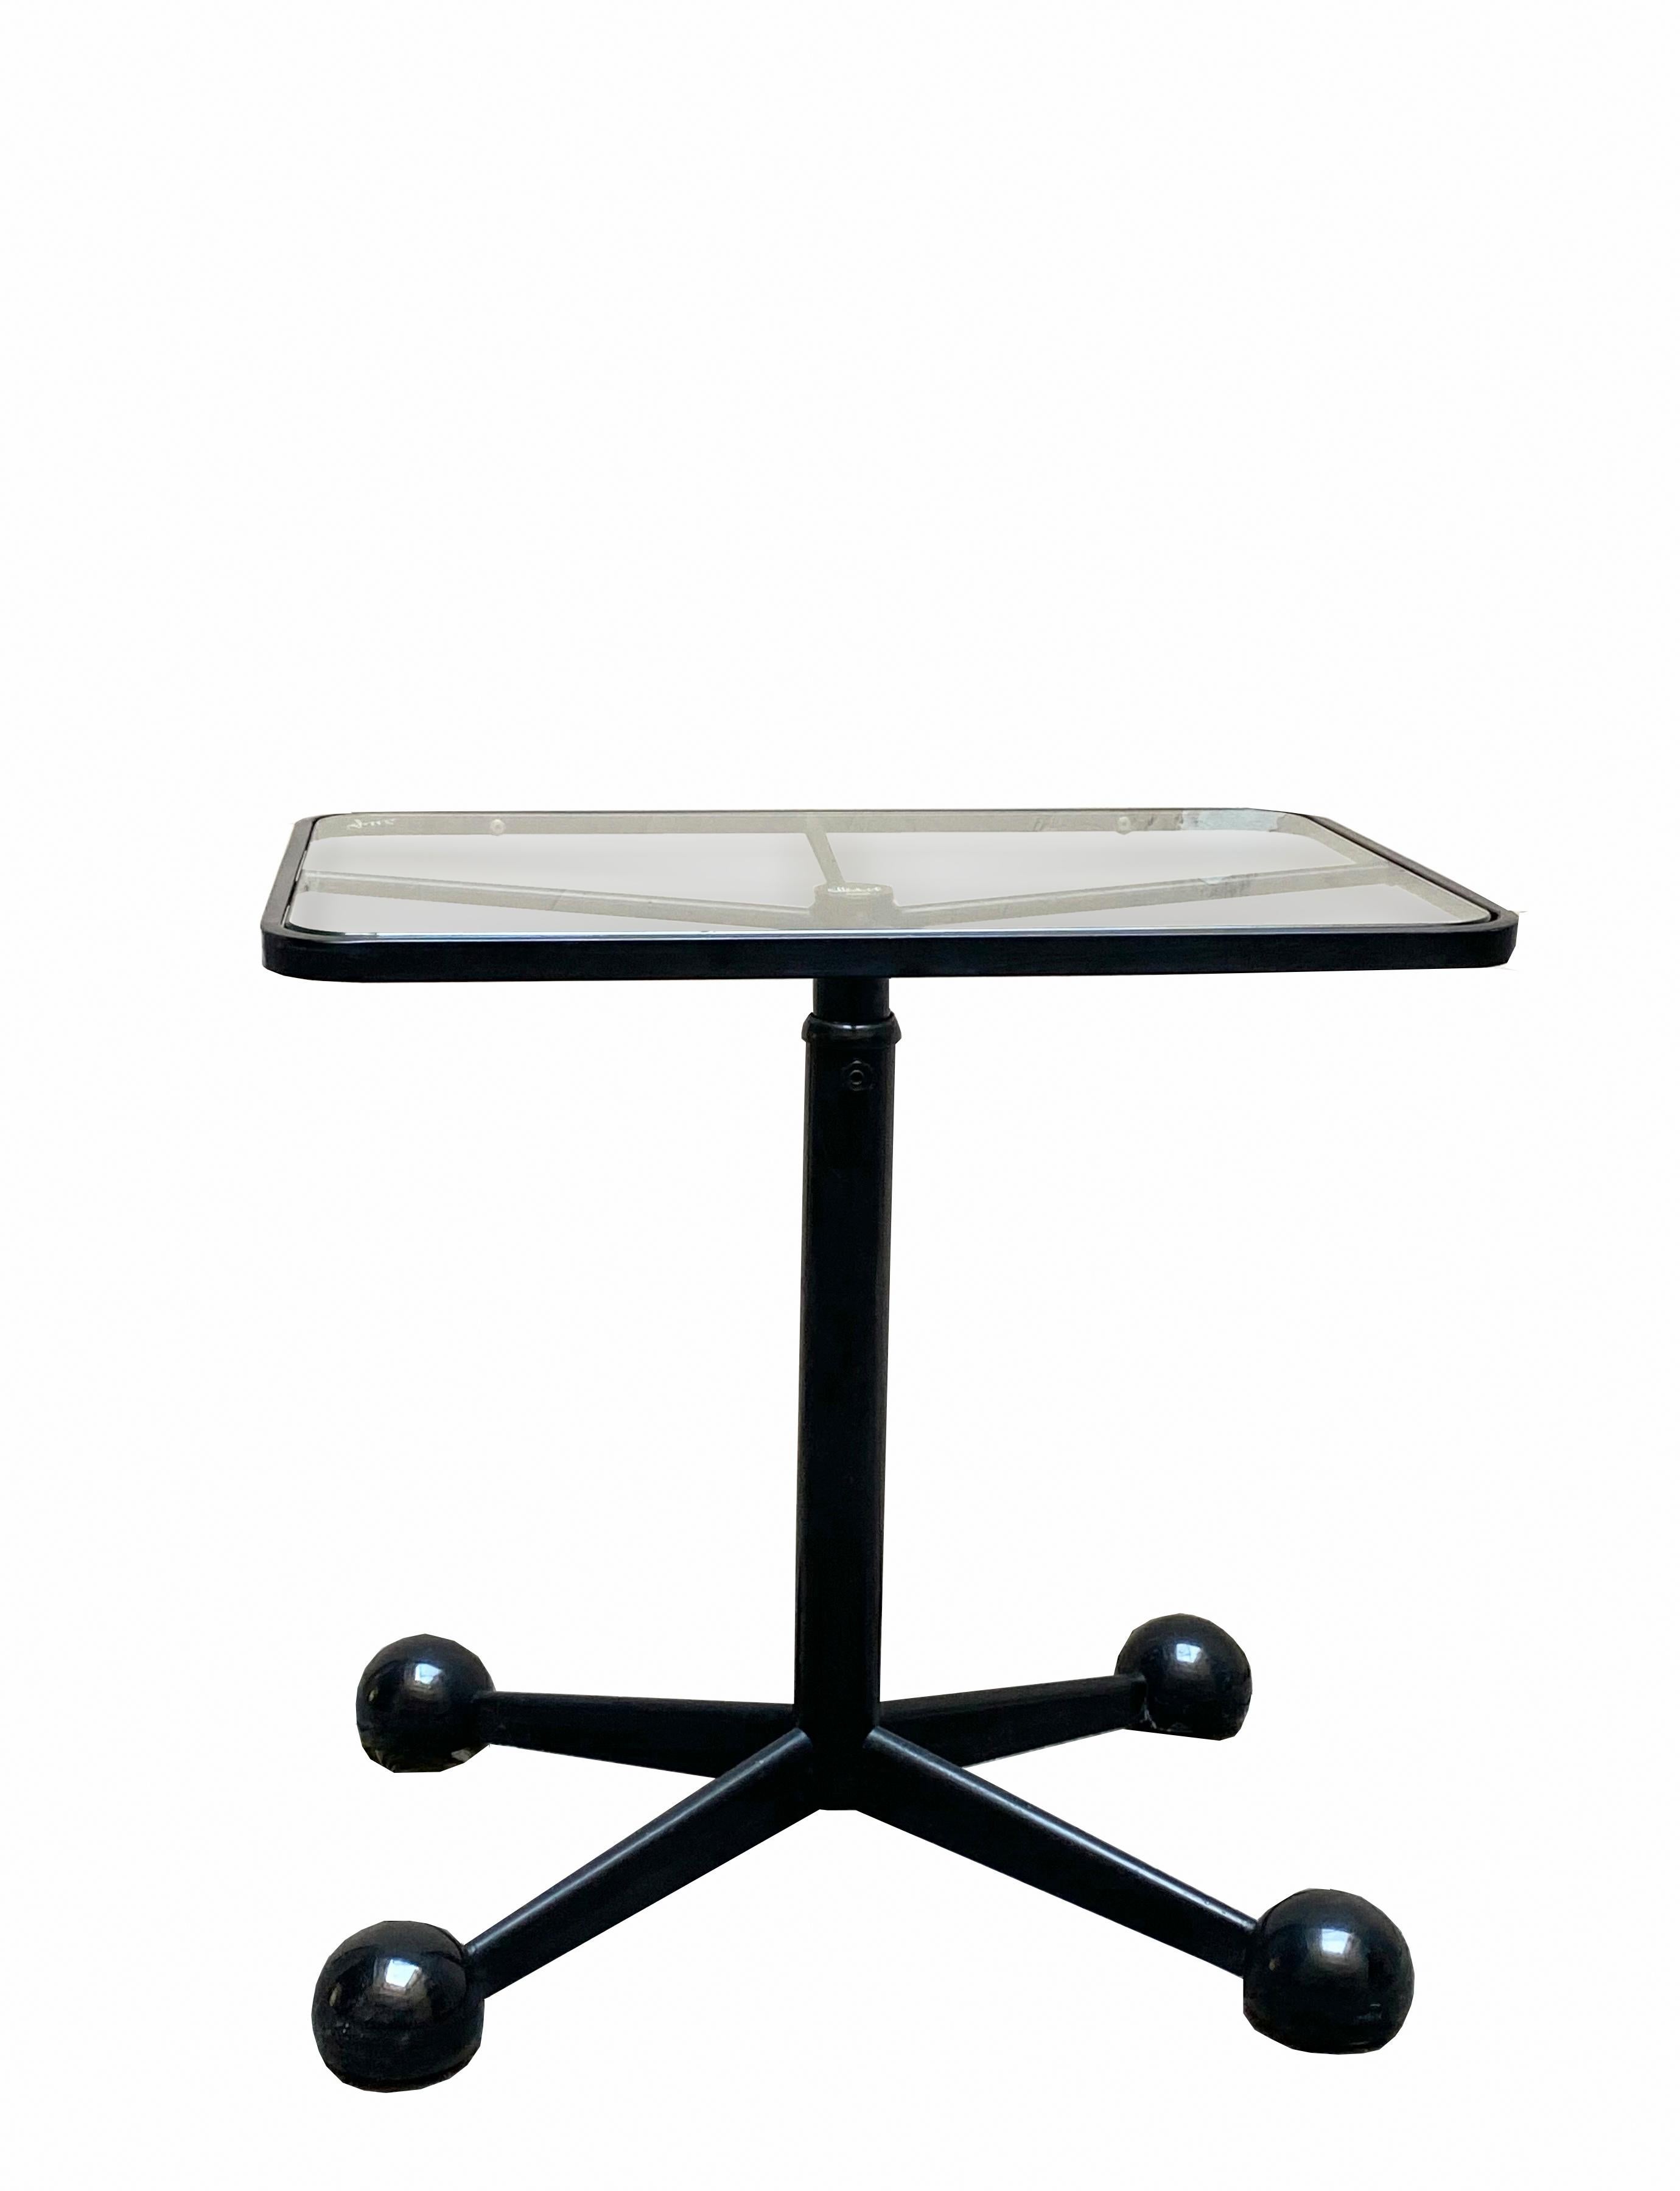 Height-adjustable swivel table/trolley in lacquered steel with glass top. Original Allegri design. 
 